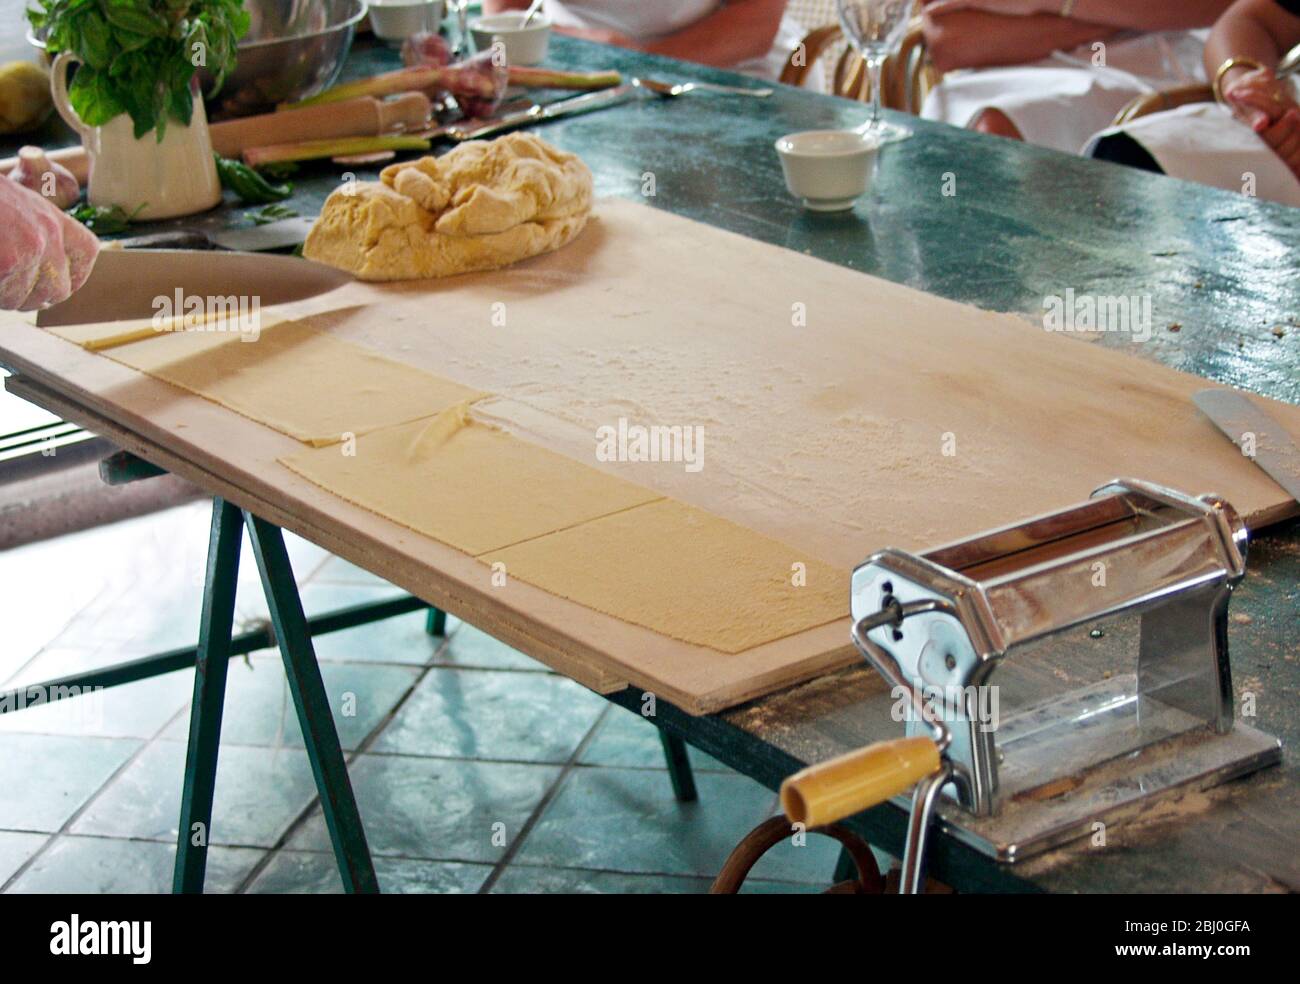 Pasta making being demonstrated at Italian cookery course in front of audience - Stock Photo